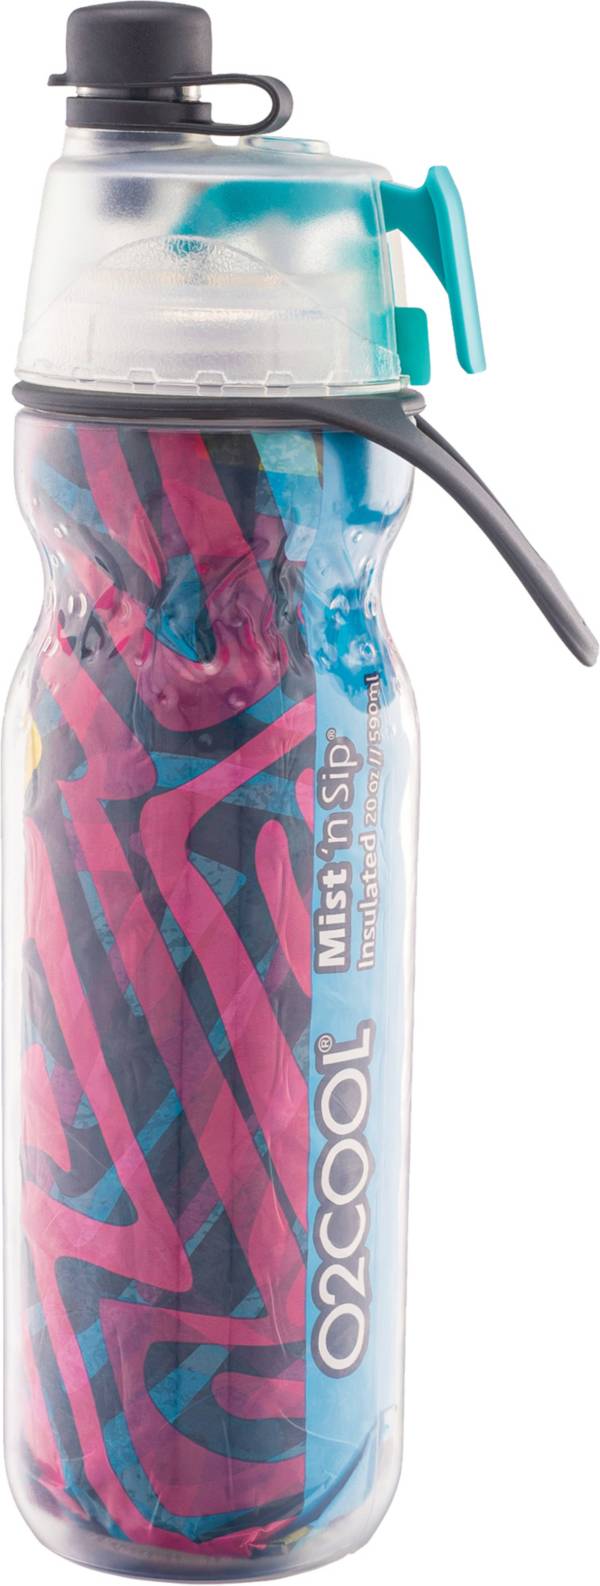 O2COOL Mist N' Sip® Water Bottle for Drinking and Misting product image